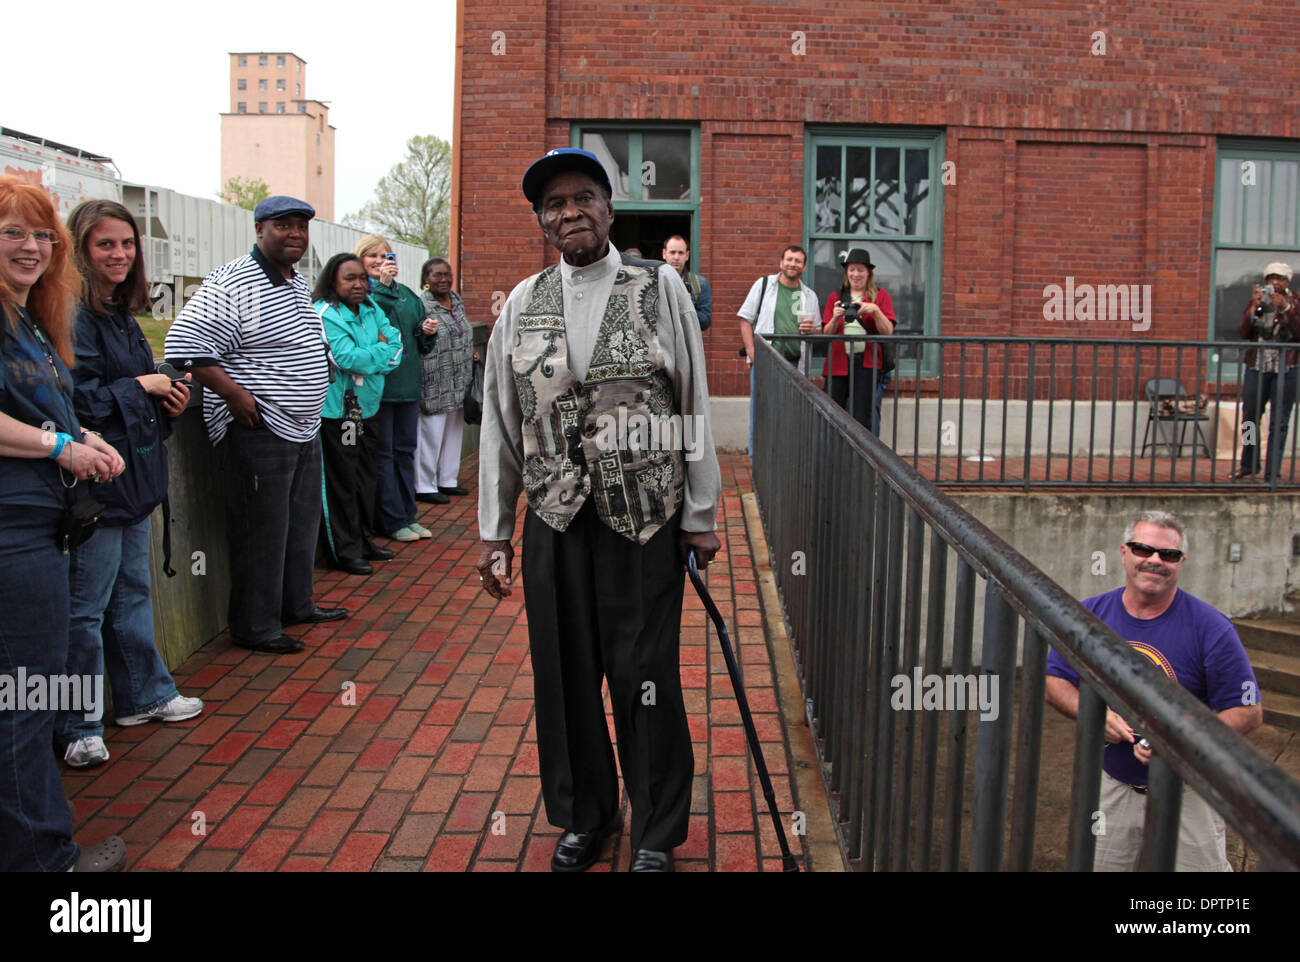 Apr 18, 2009 - Clarksdale, Mississippi, USA - David 'Honeyboy' Edwards, 94, walks to the Delta Blues Museum stage to perform in downtown Clarksdale during the 6th annual Juke Joint Festival which showcases Mississippi Delta Blues music. Honeyboy a Grammy award winner continues to tour as one of the oldest Delta blues players and is credited with writing 'Sweet  Home Chicago.' The a Stock Photo